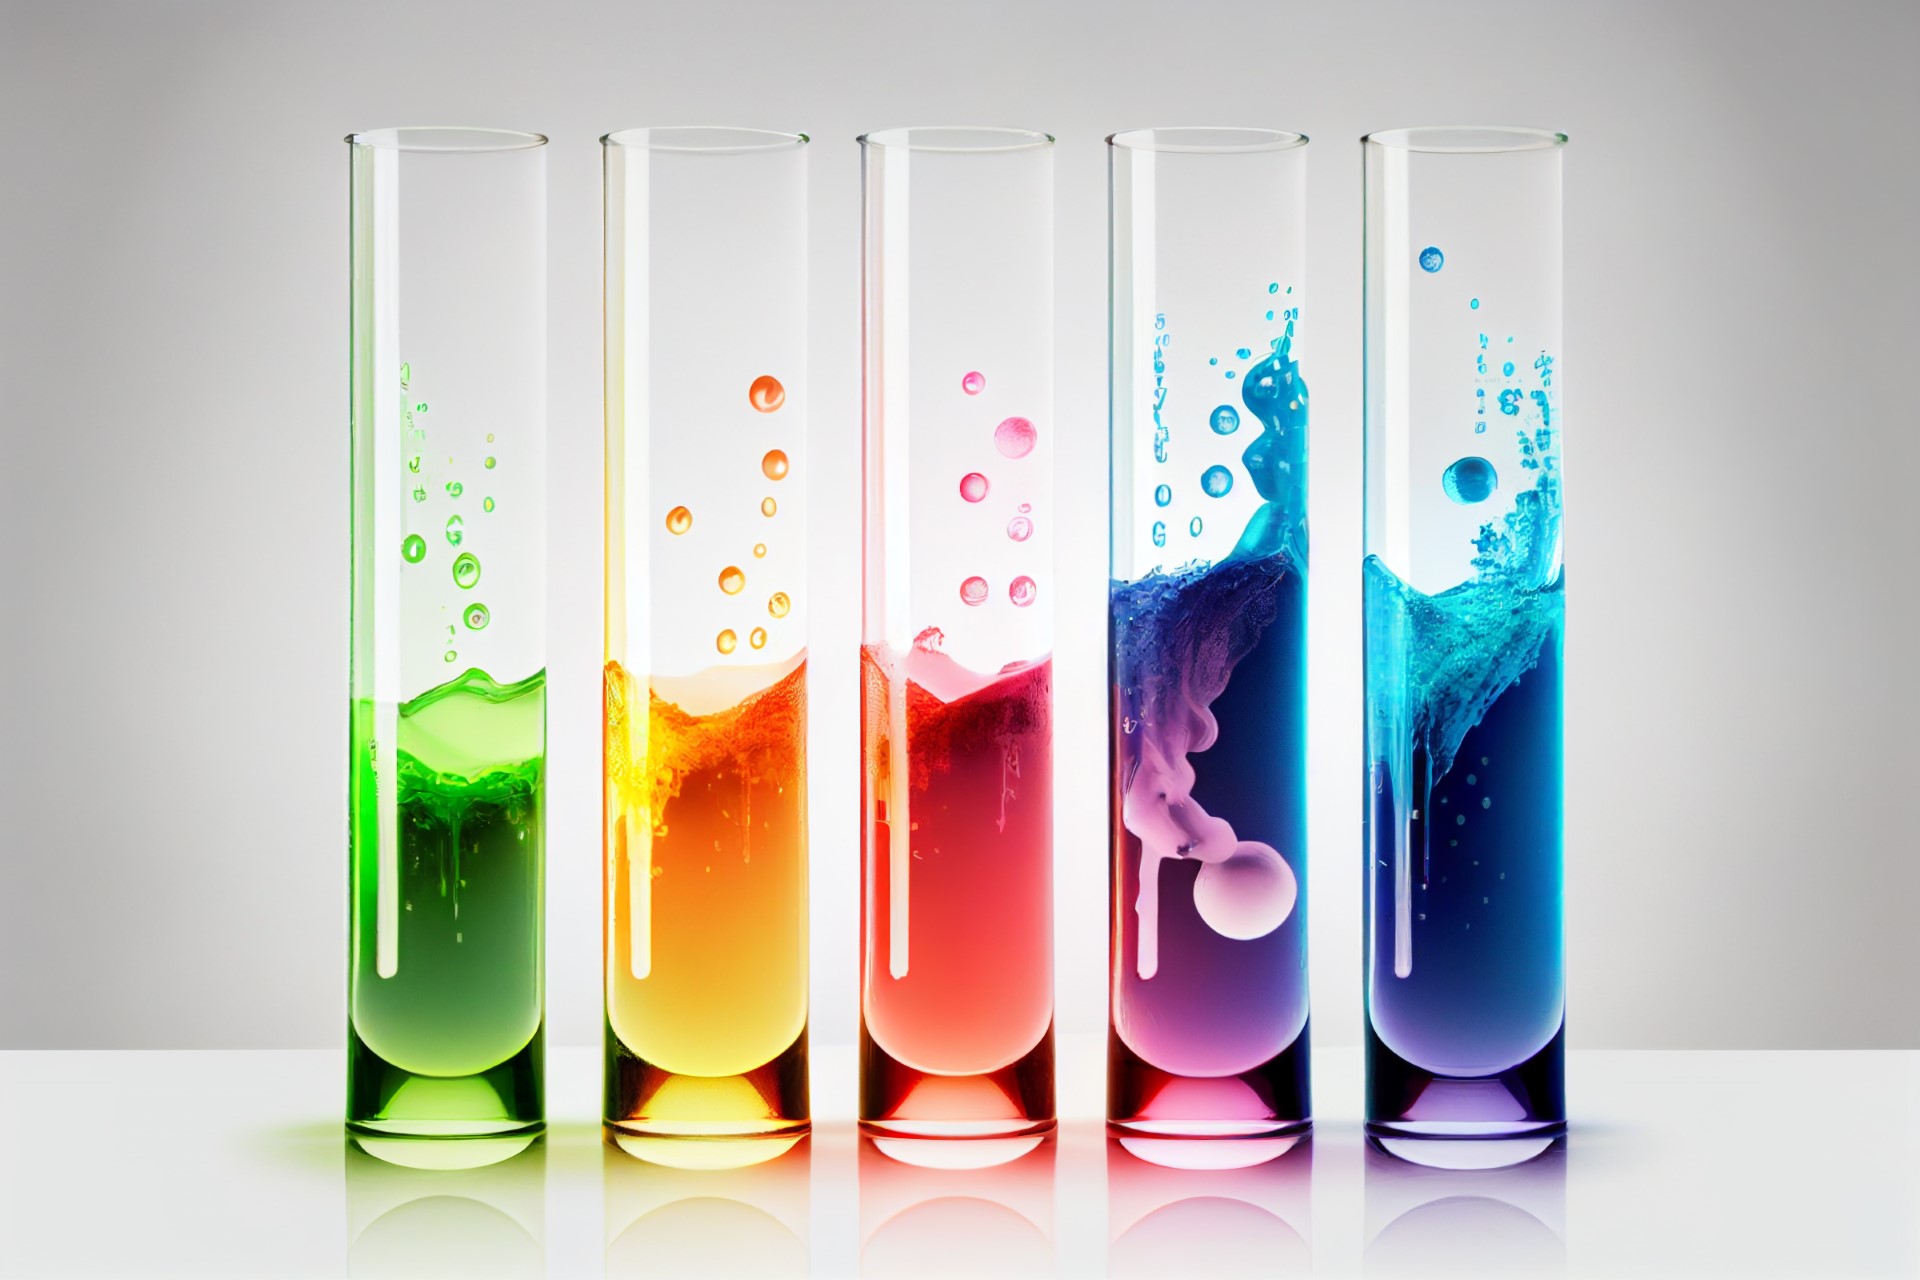 5 test tubes with green, yellow, red, purple and blue coloured liquid to make a rainbow. Used by patient guard to represent biological evaluation services.